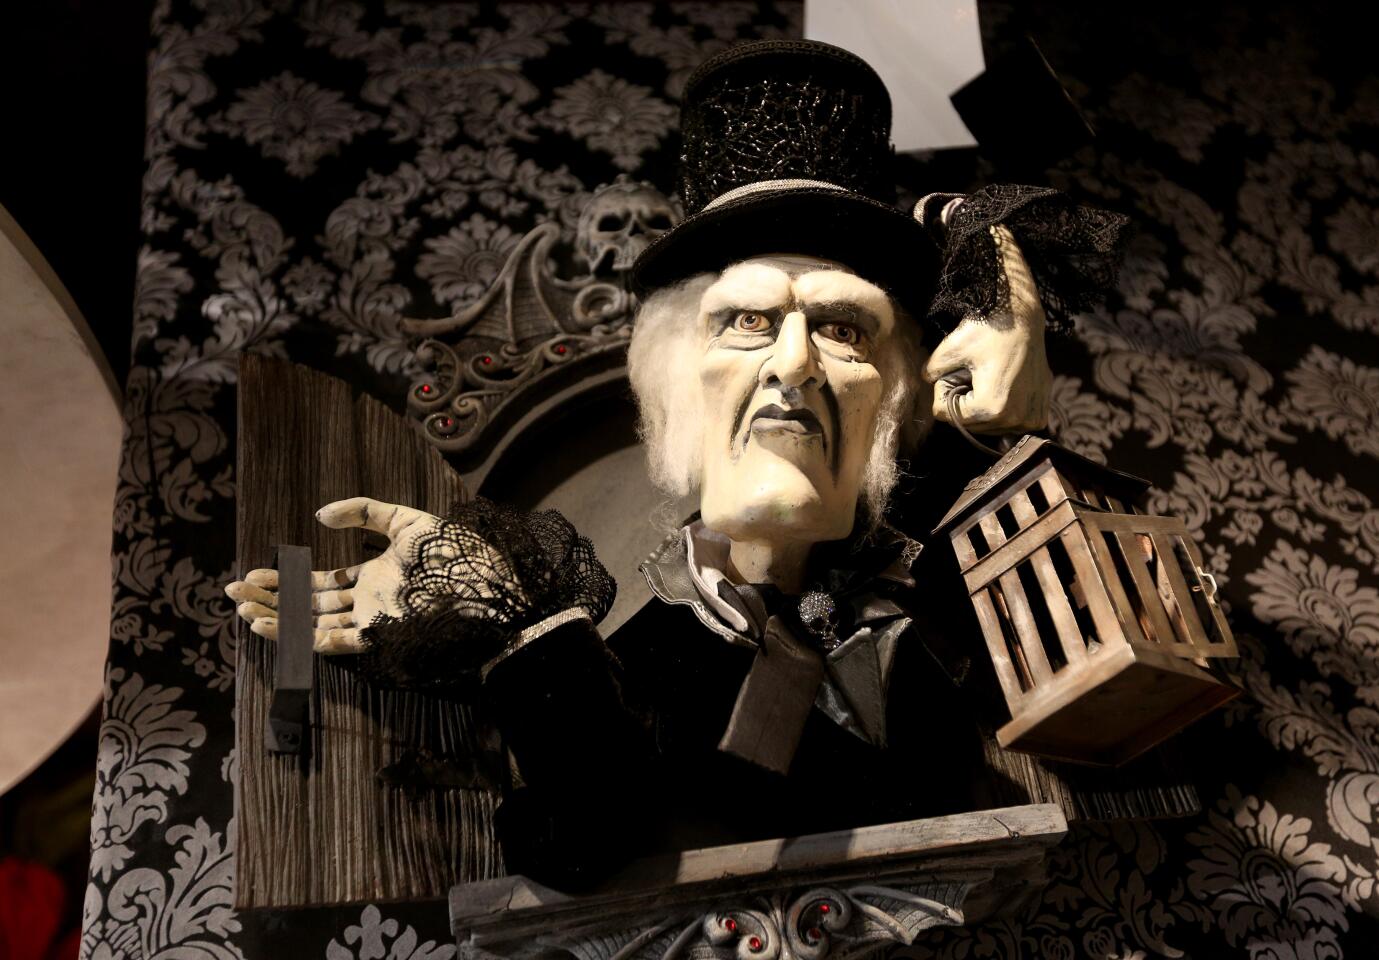 A wall decoration appears to offer a stern warning at Roger's Gardens' "Malice in Wonderland" Halloween boutique.